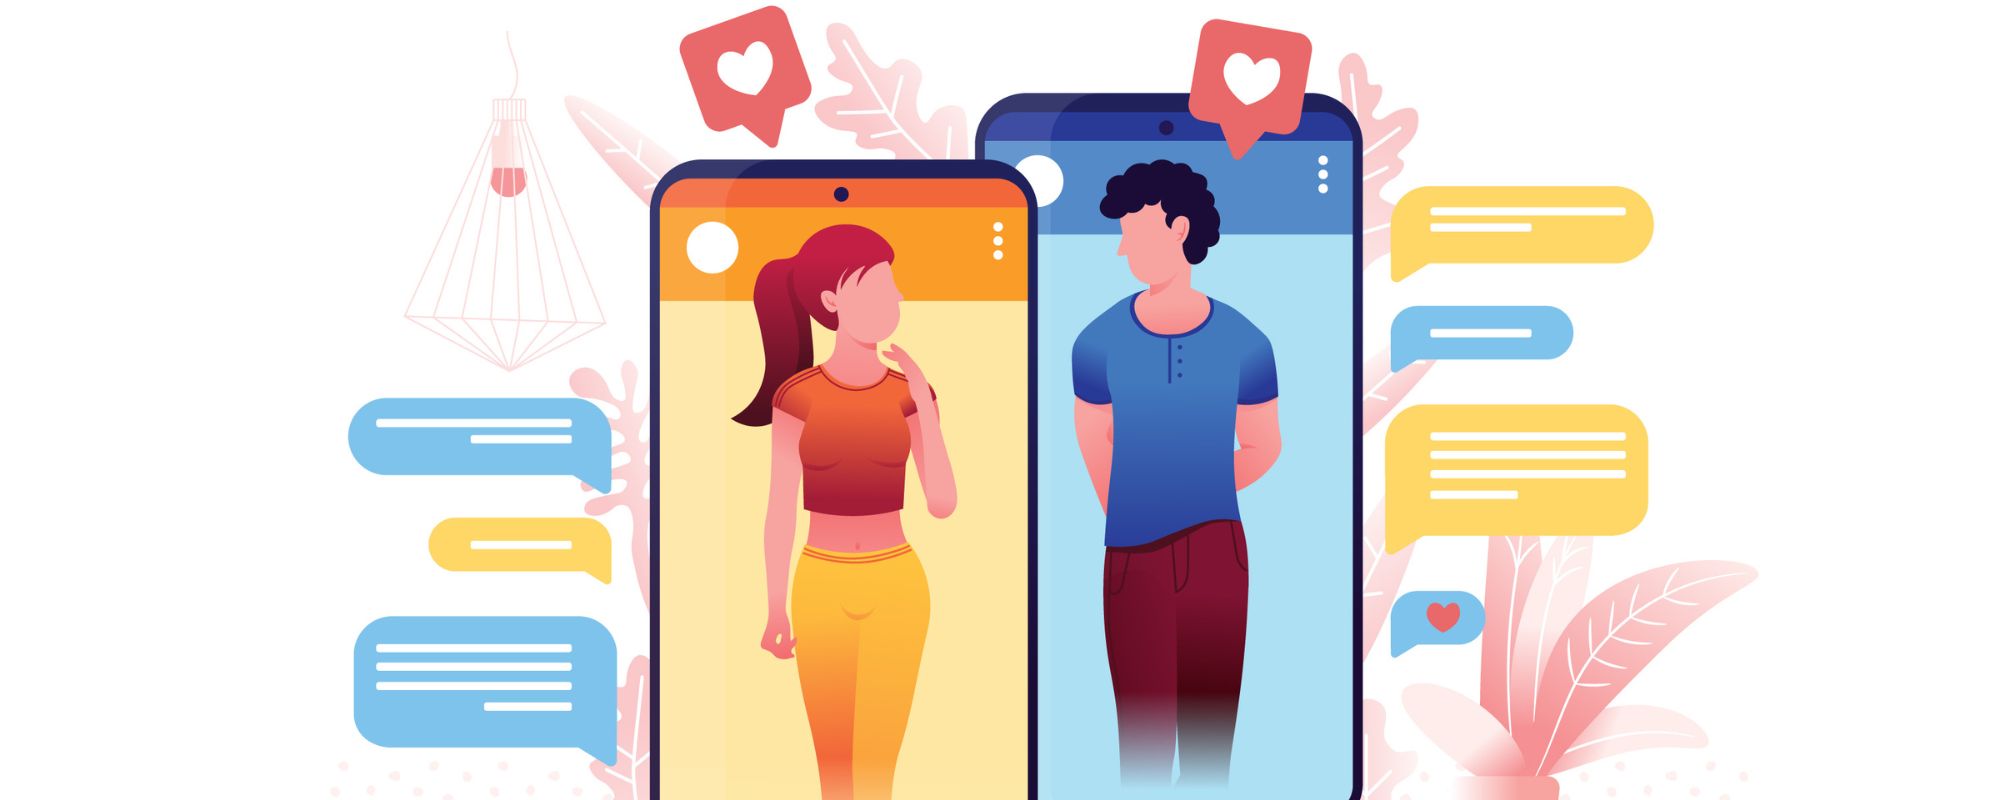 native vs hybrid dating apps which is best